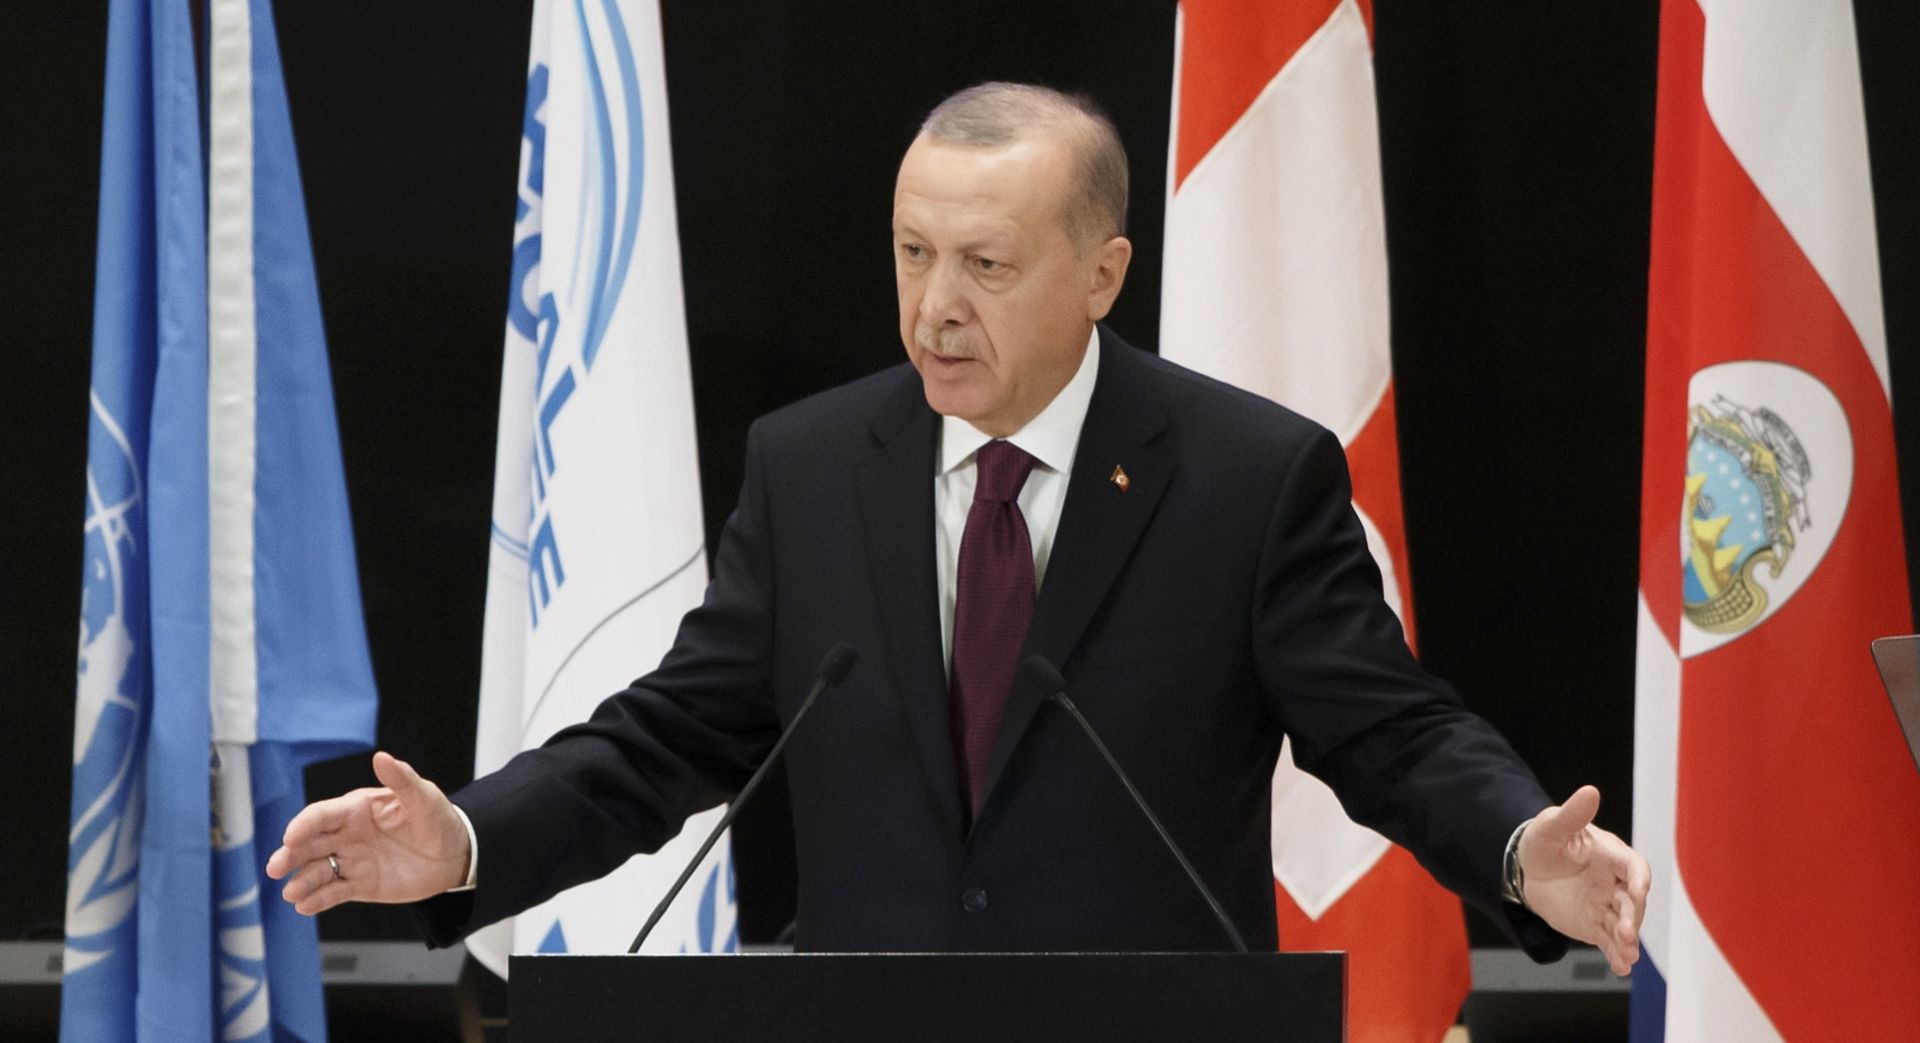 epa08076575 Turkey's President Recep Tayyip Erdogan delivers his statement during the United Nations High Commissioner for Refugees (UNHCR) Global Refugee Forum at the European headquarters of the United Nations (UNOG) in Geneva, Switzerland, 17 December 2019.  EPA/SALVATORE DI NOLFI